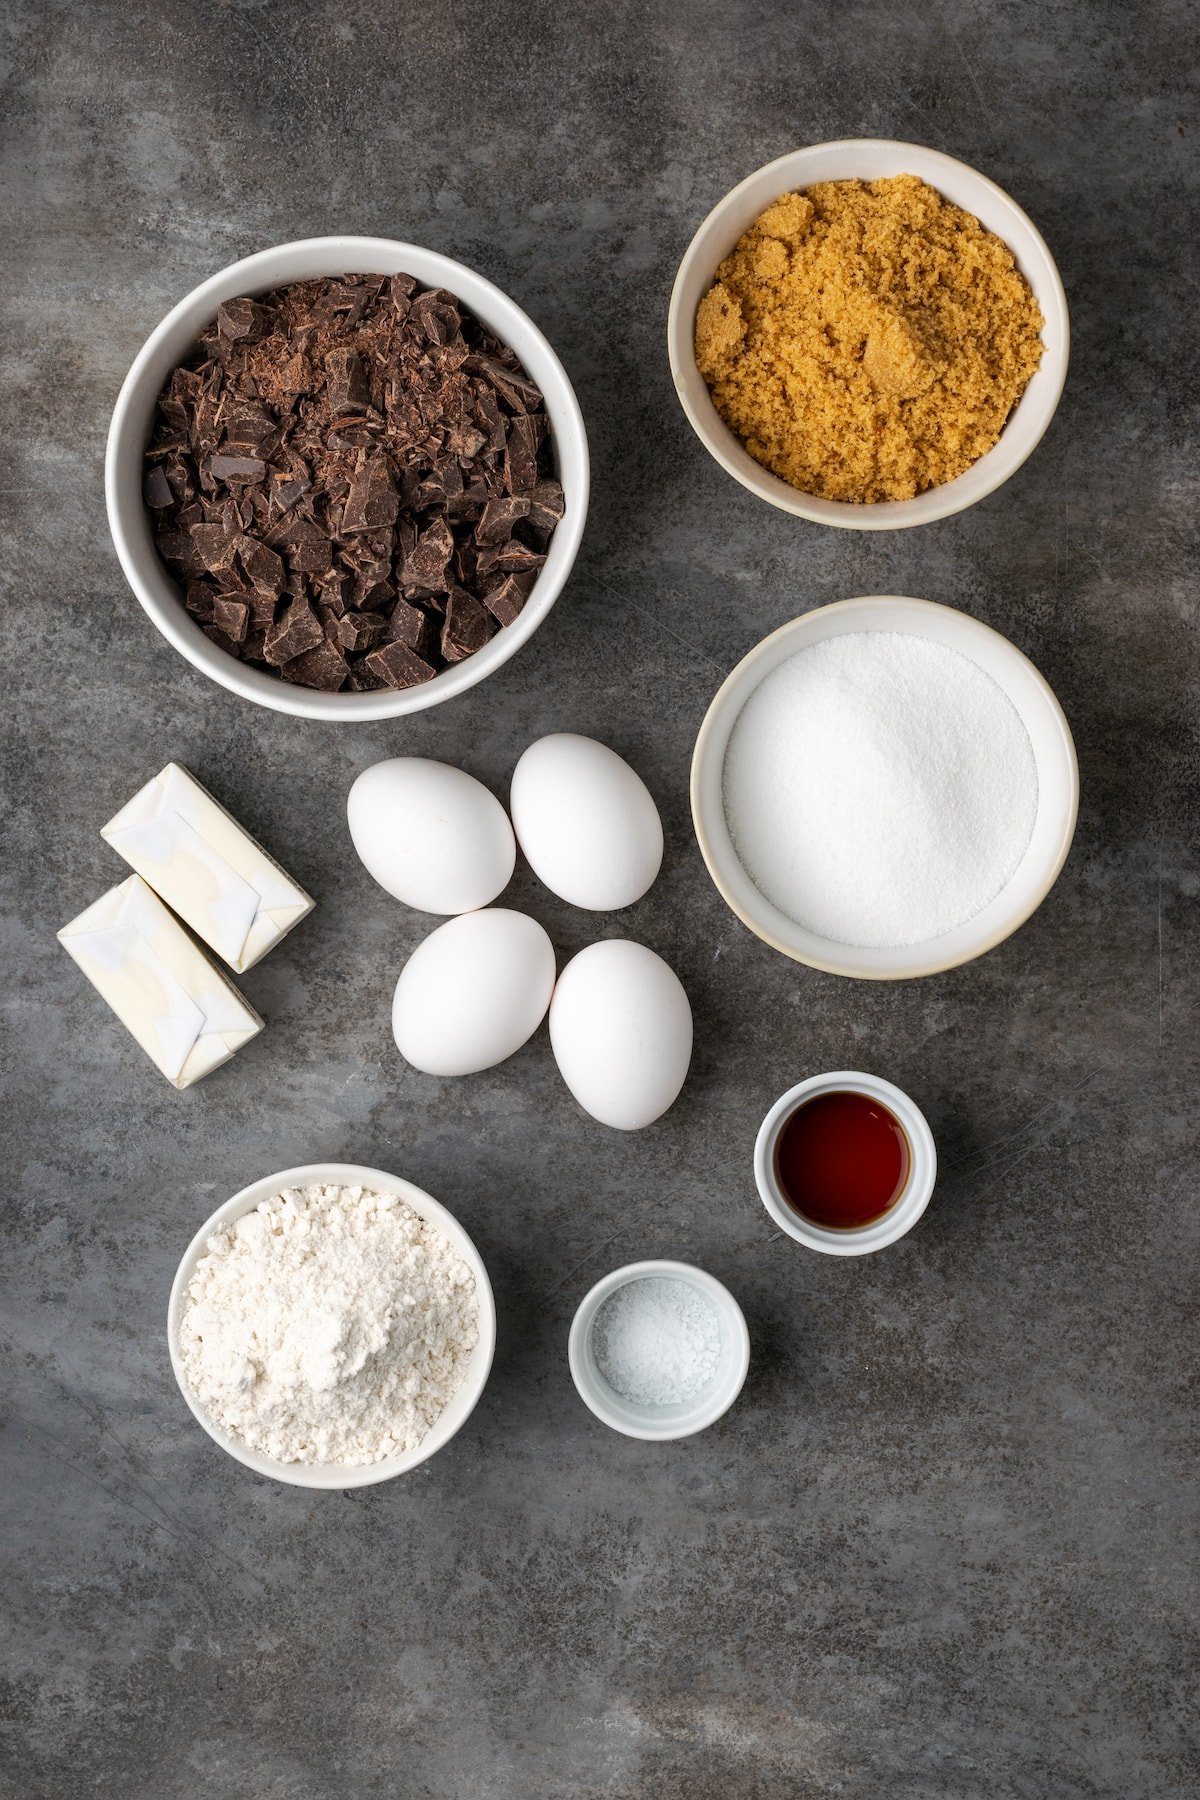 The ingredients for the brownie layer.